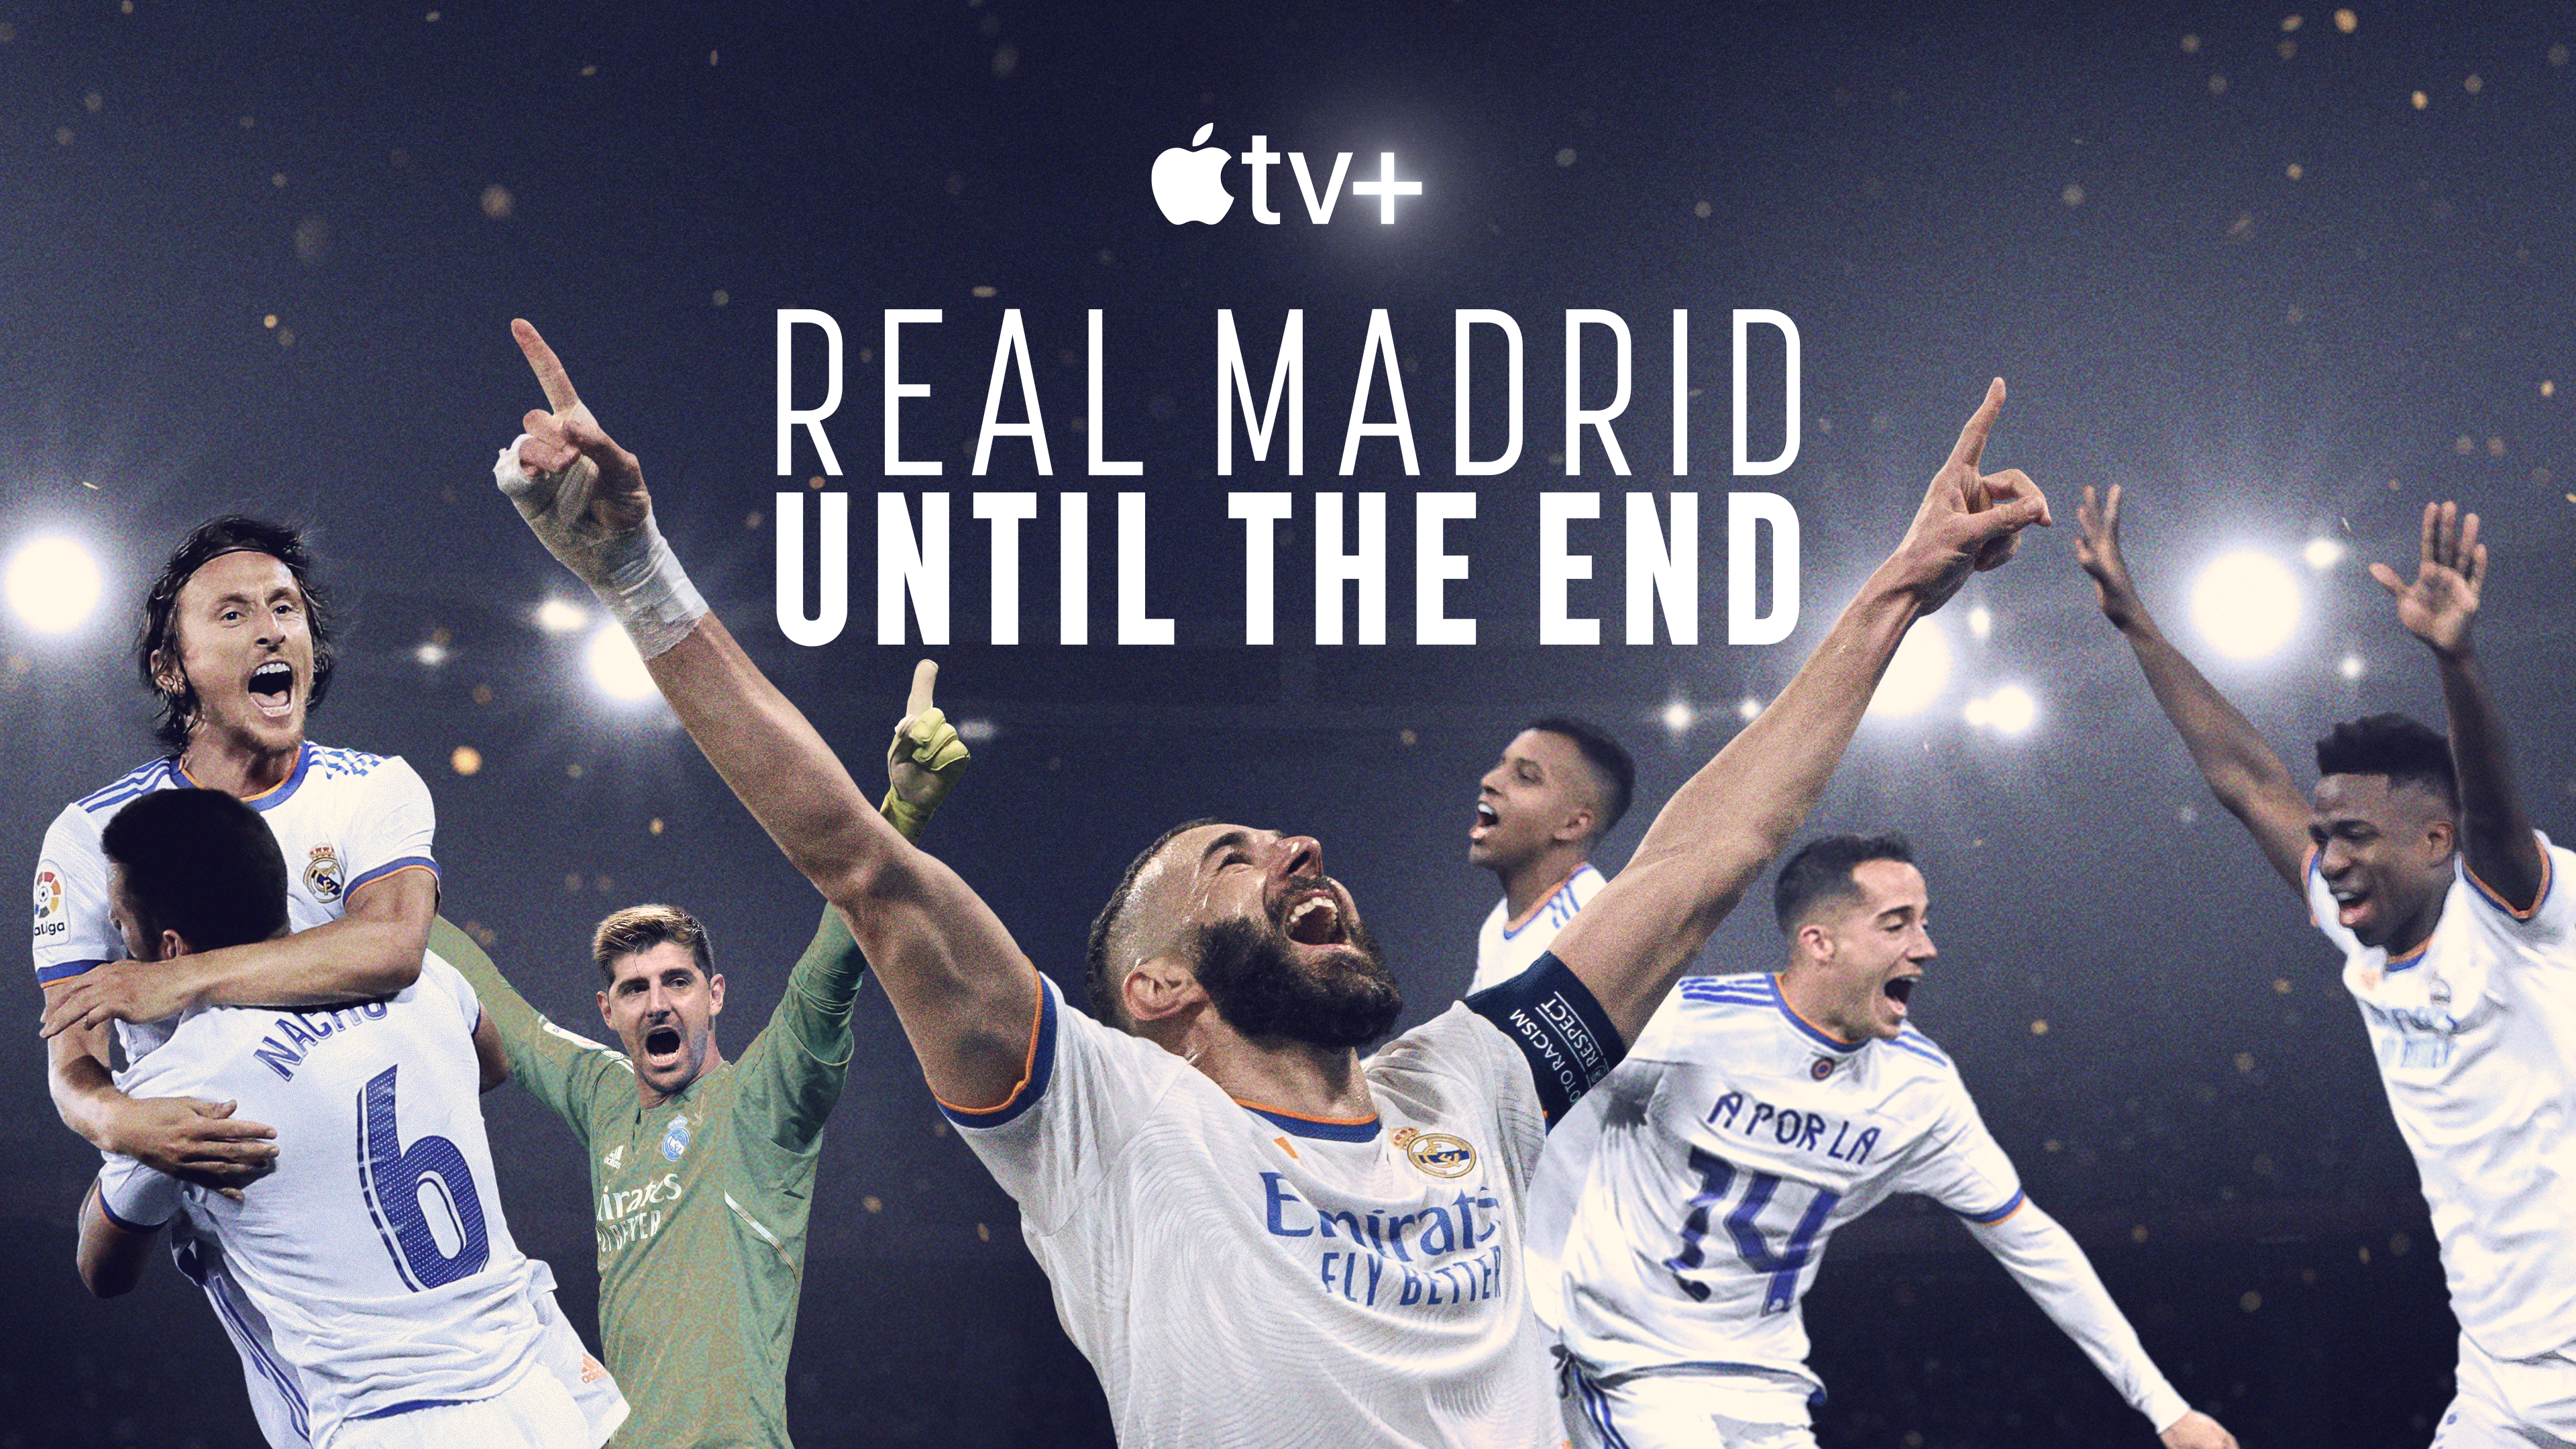 Exclusive Clip of Apple TV+’s Real Madrid: Until The End Has Team Bonding Before a Game